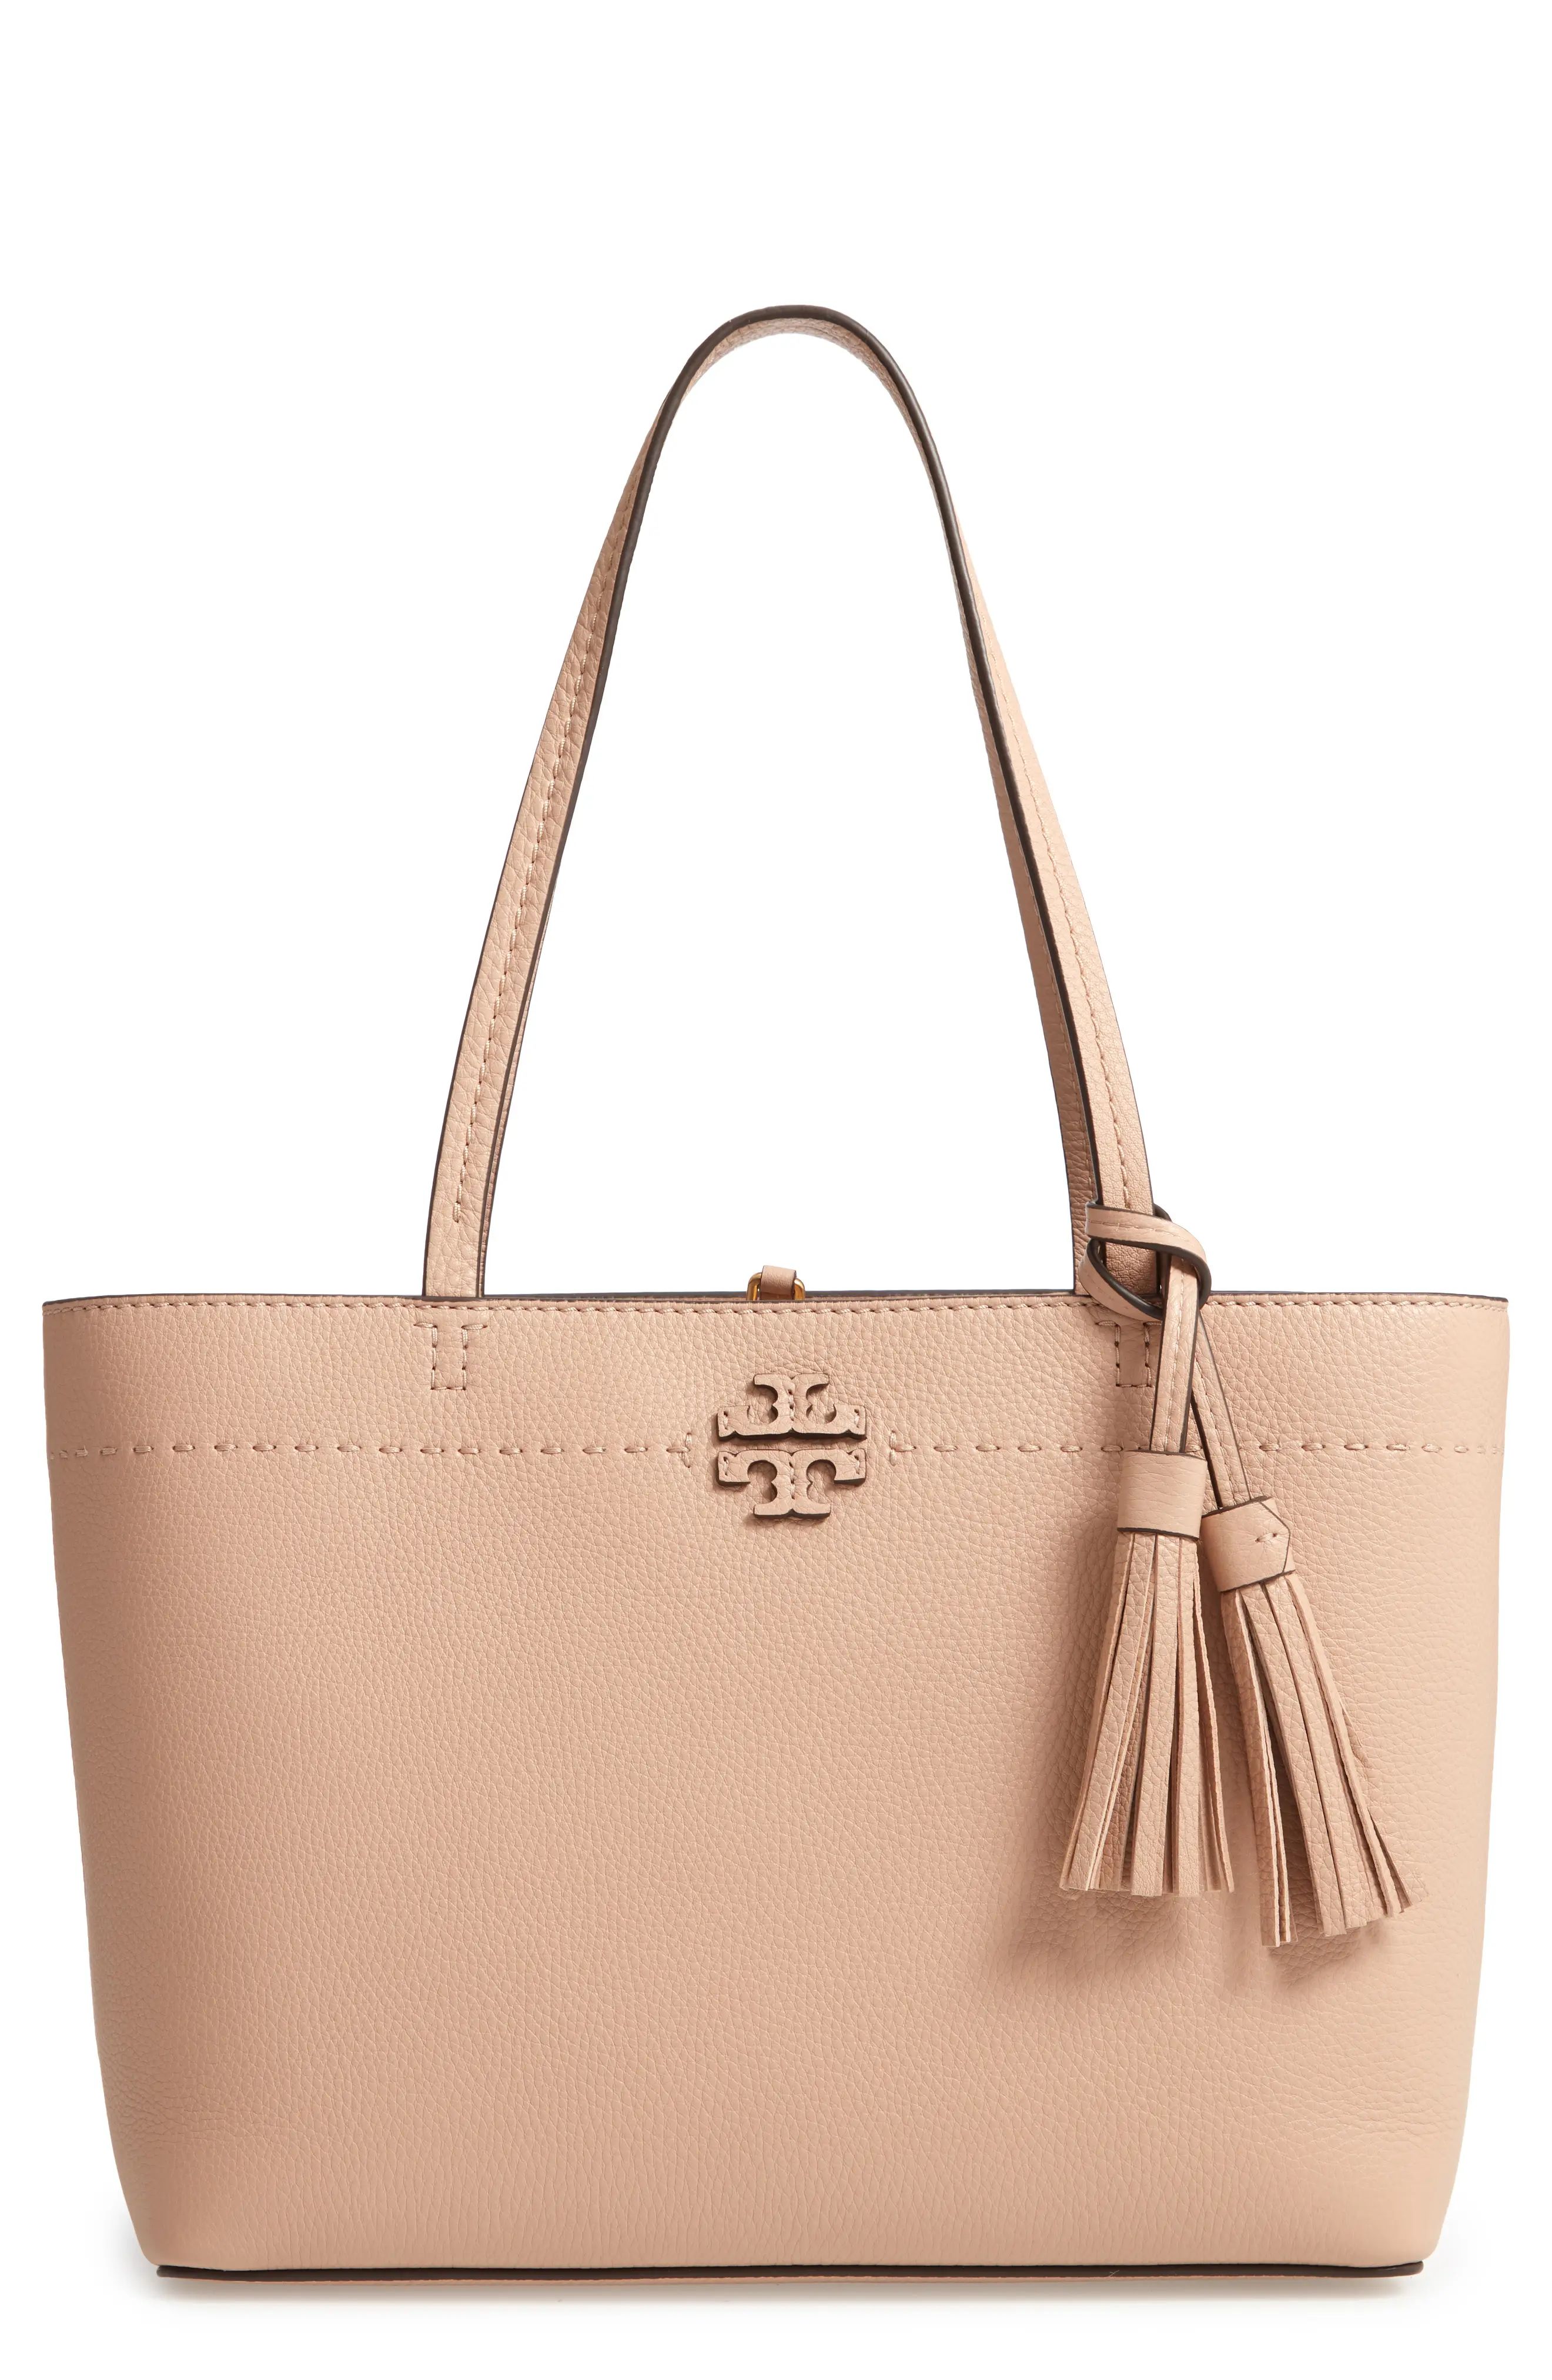 Tory Burch Small McGraw Leather Tote | Nordstrom